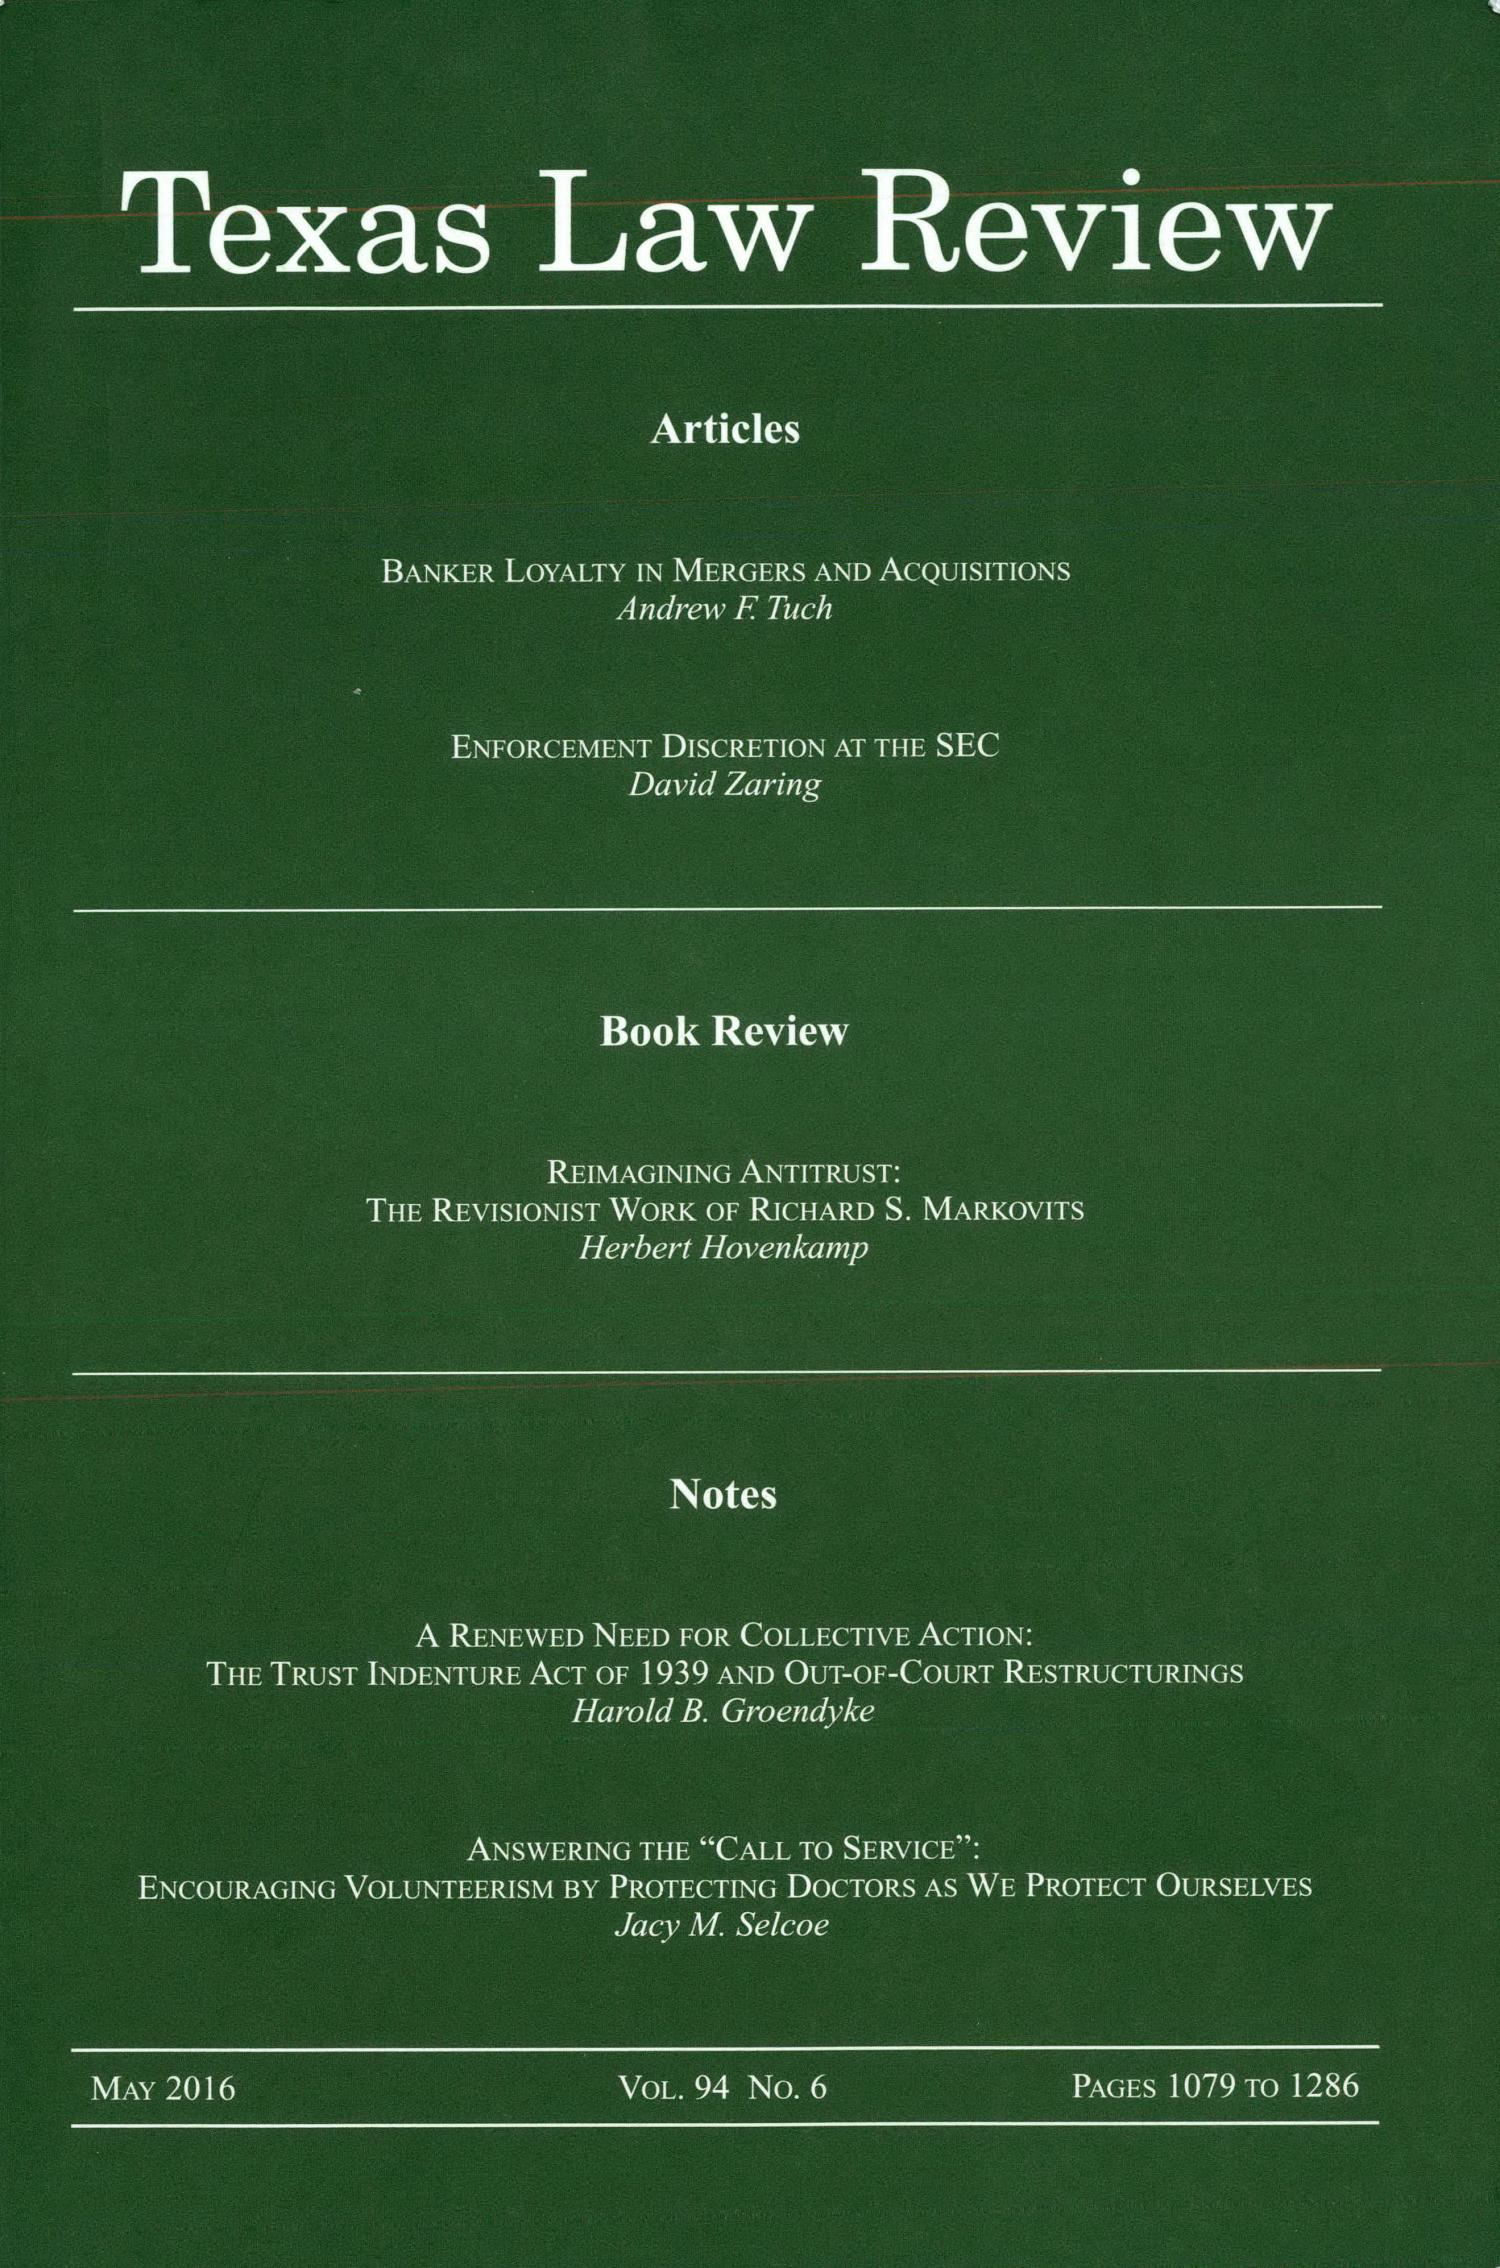 Texas Law Review, Volume 94, Number 6, May 2016
                                                
                                                    Front Cover
                                                